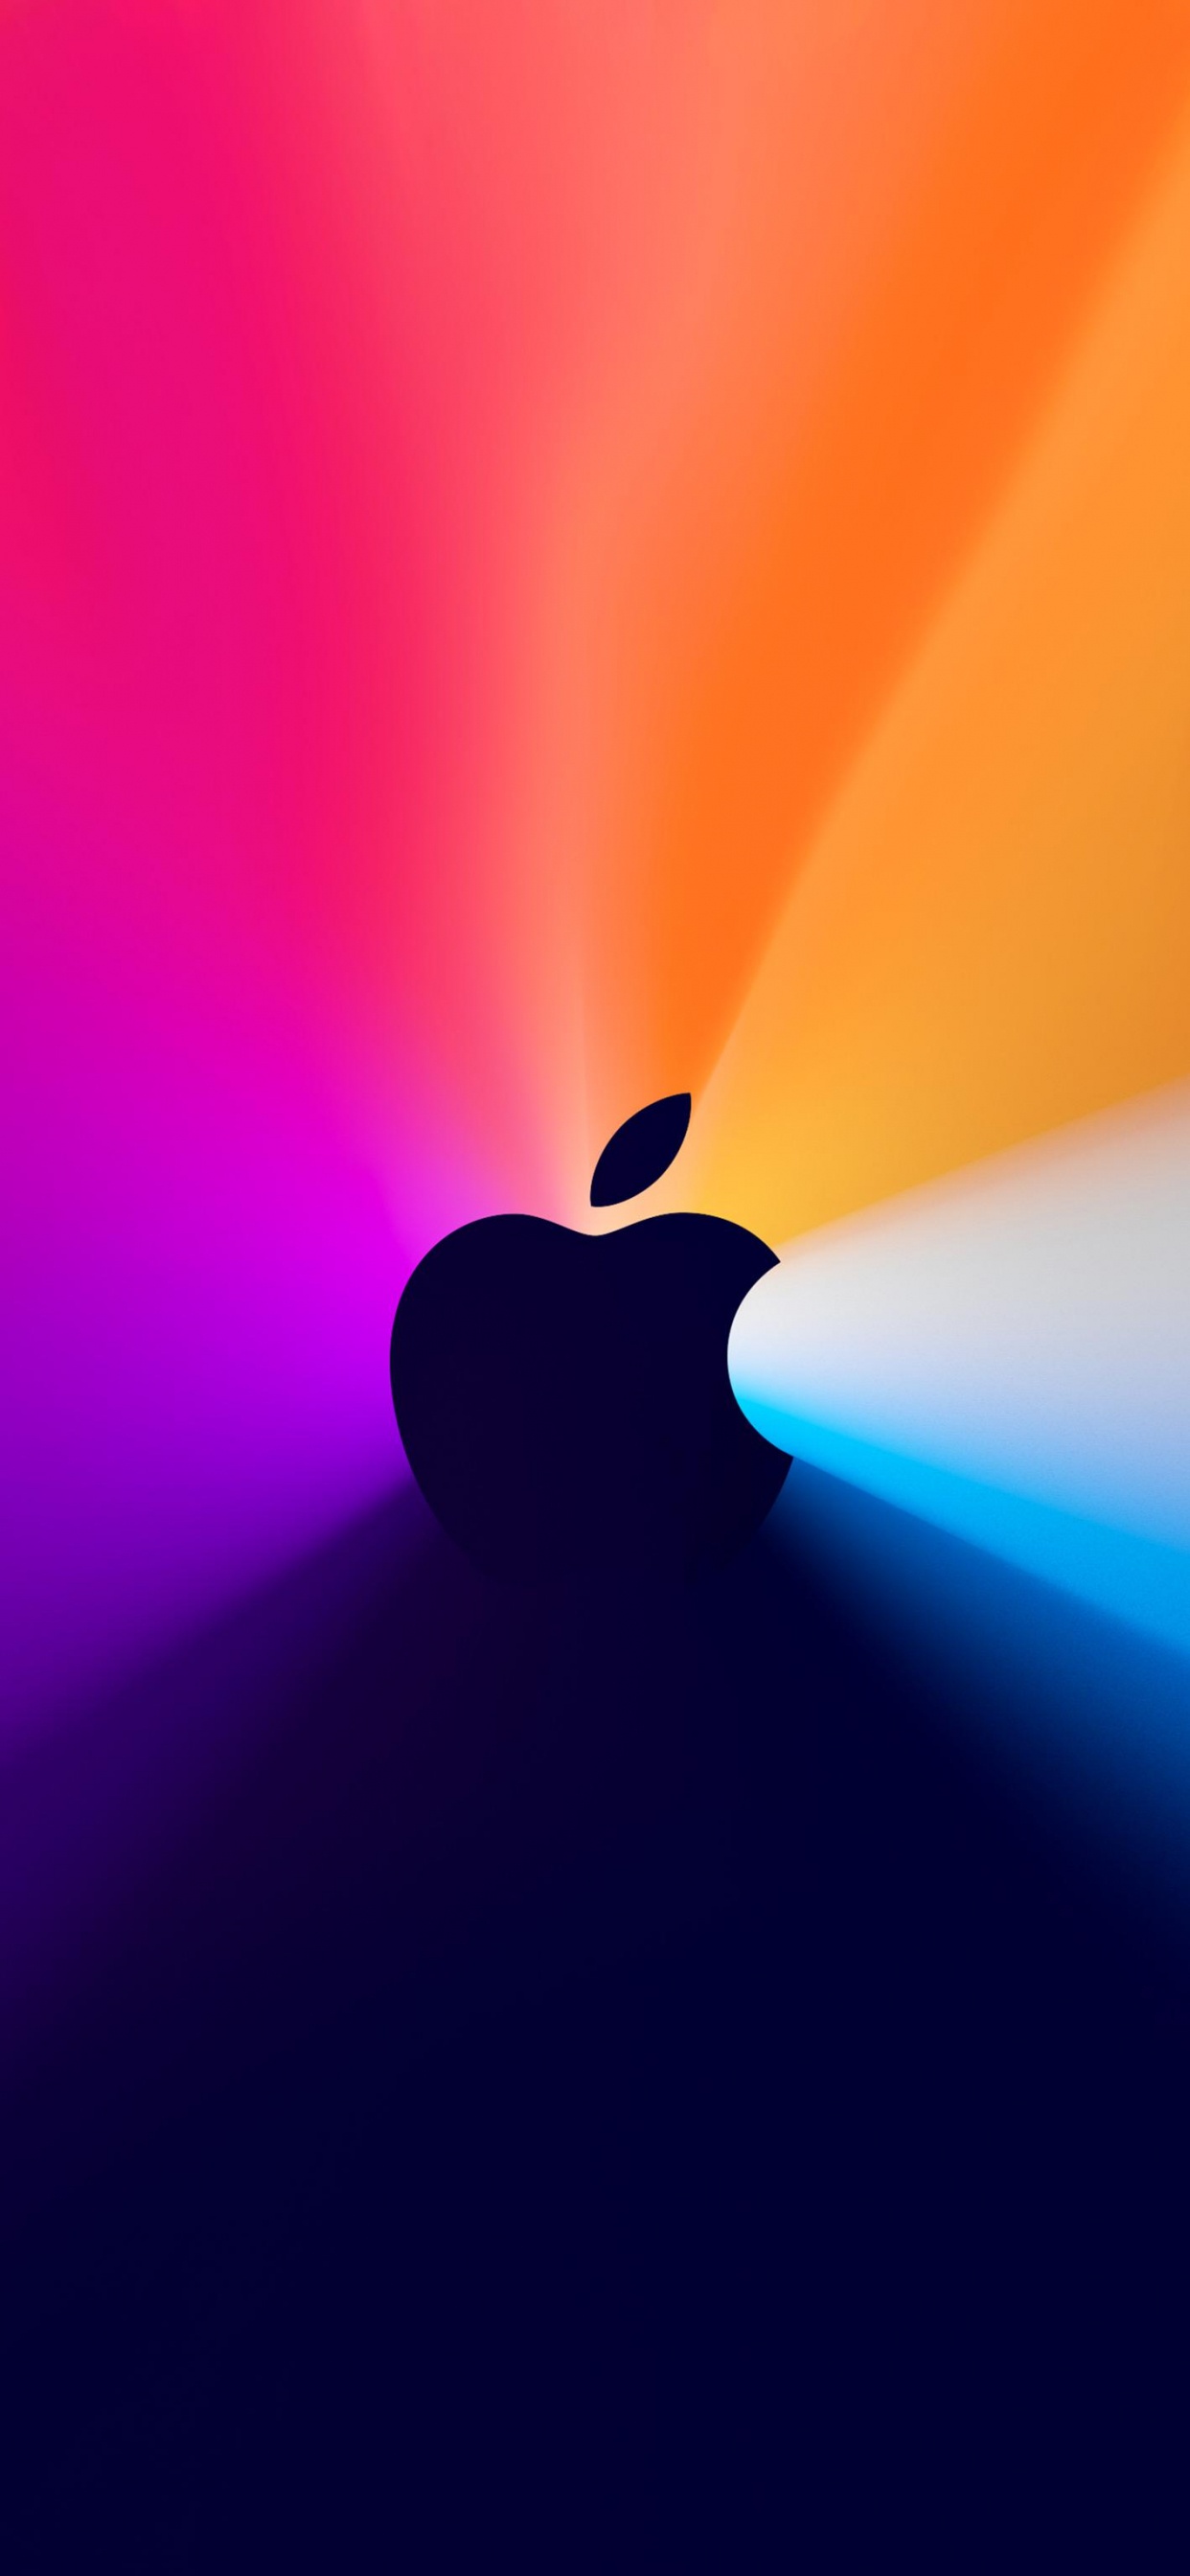 Apple, IPhone, Apples, One More Thing, Homepod. Wallpaper in 1242x2688 Resolution